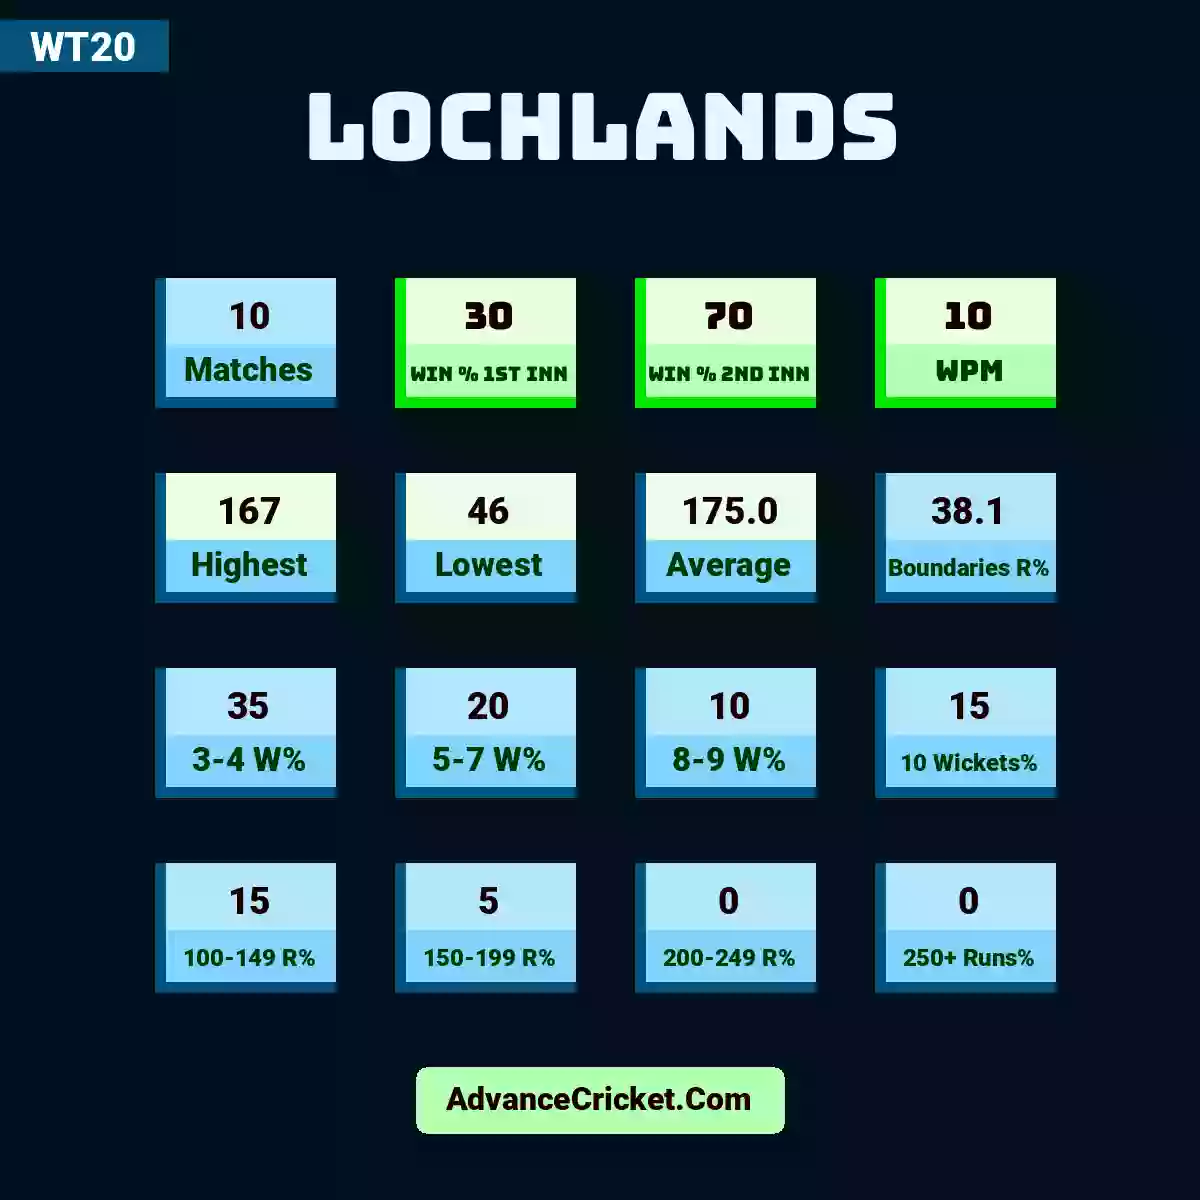 Image showing Lochlands with Matches: 10, Win % 1st Inn: 30, Win % 2nd Inn: 70, WPM: 10, Highest: 167, Lowest: 46, Average: 175.0, Boundaries R%: 38.1, 3-4 W%: 35, 5-7 W%: 20, 8-9 W%: 10, 10 Wickets%: 15, 100-149 R%: 15, 150-199 R%: 5, 200-249 R%: 0, 250+ Runs%: 0.